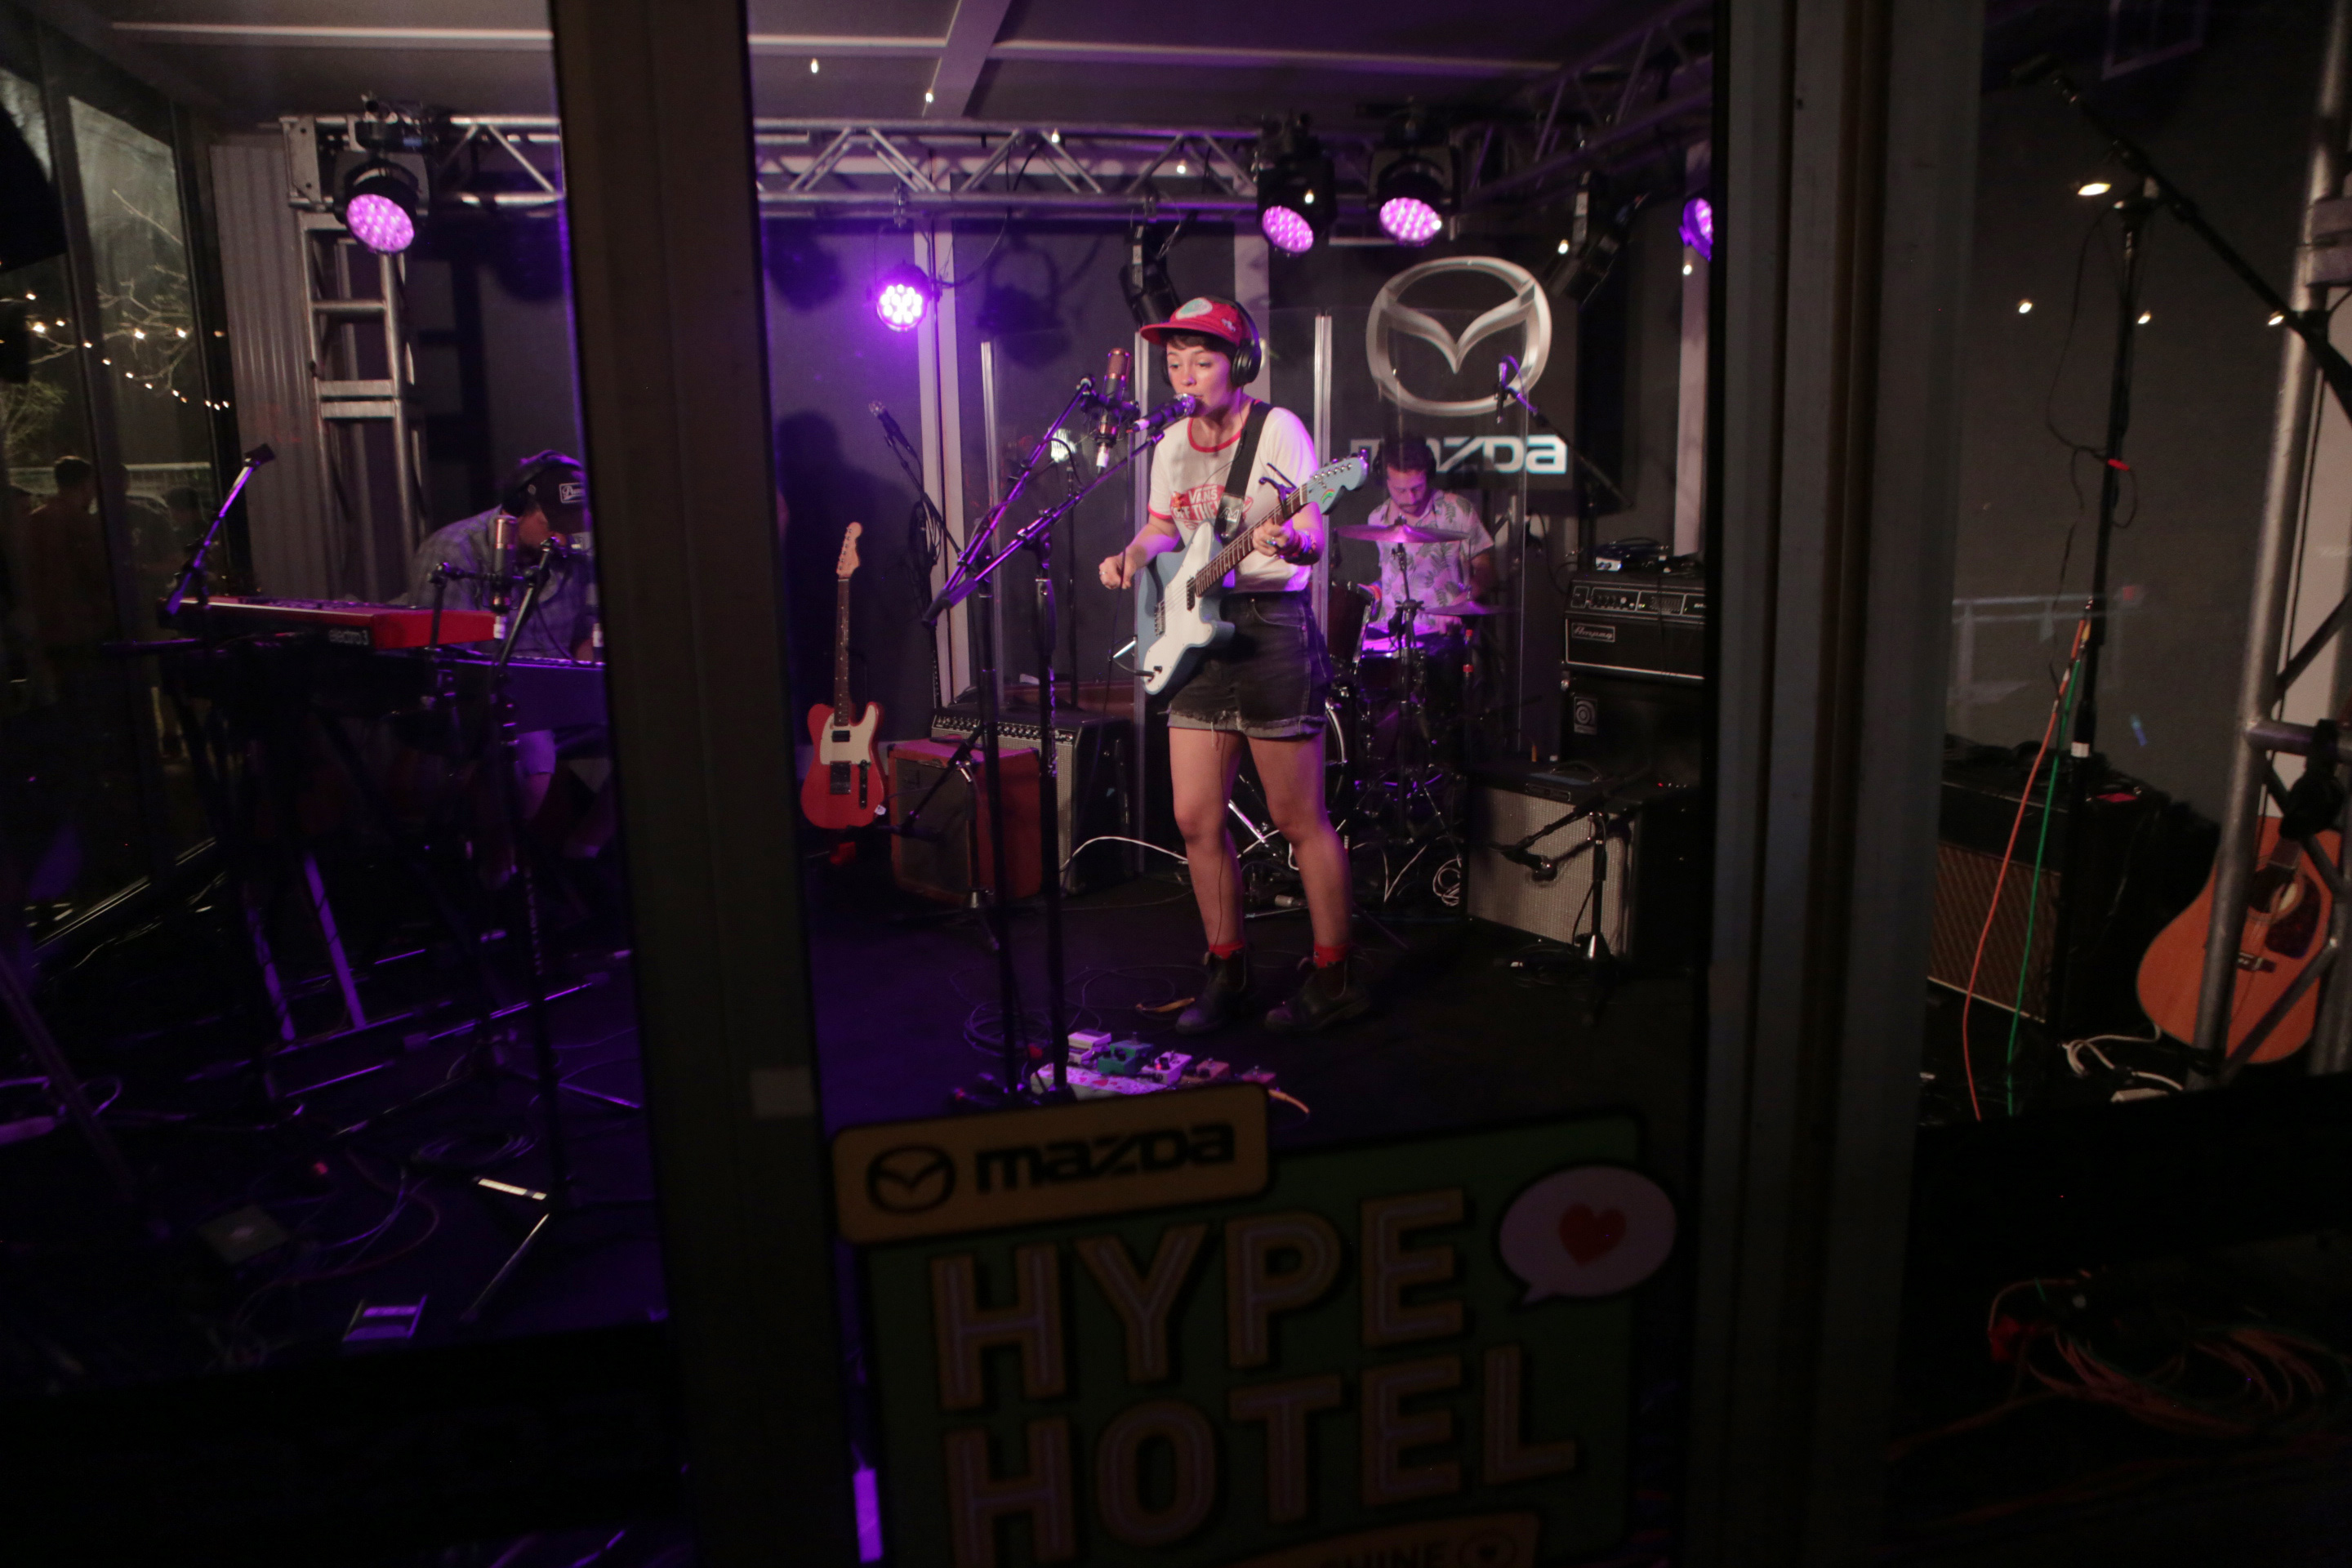 Diet Cig at Hype Hotel